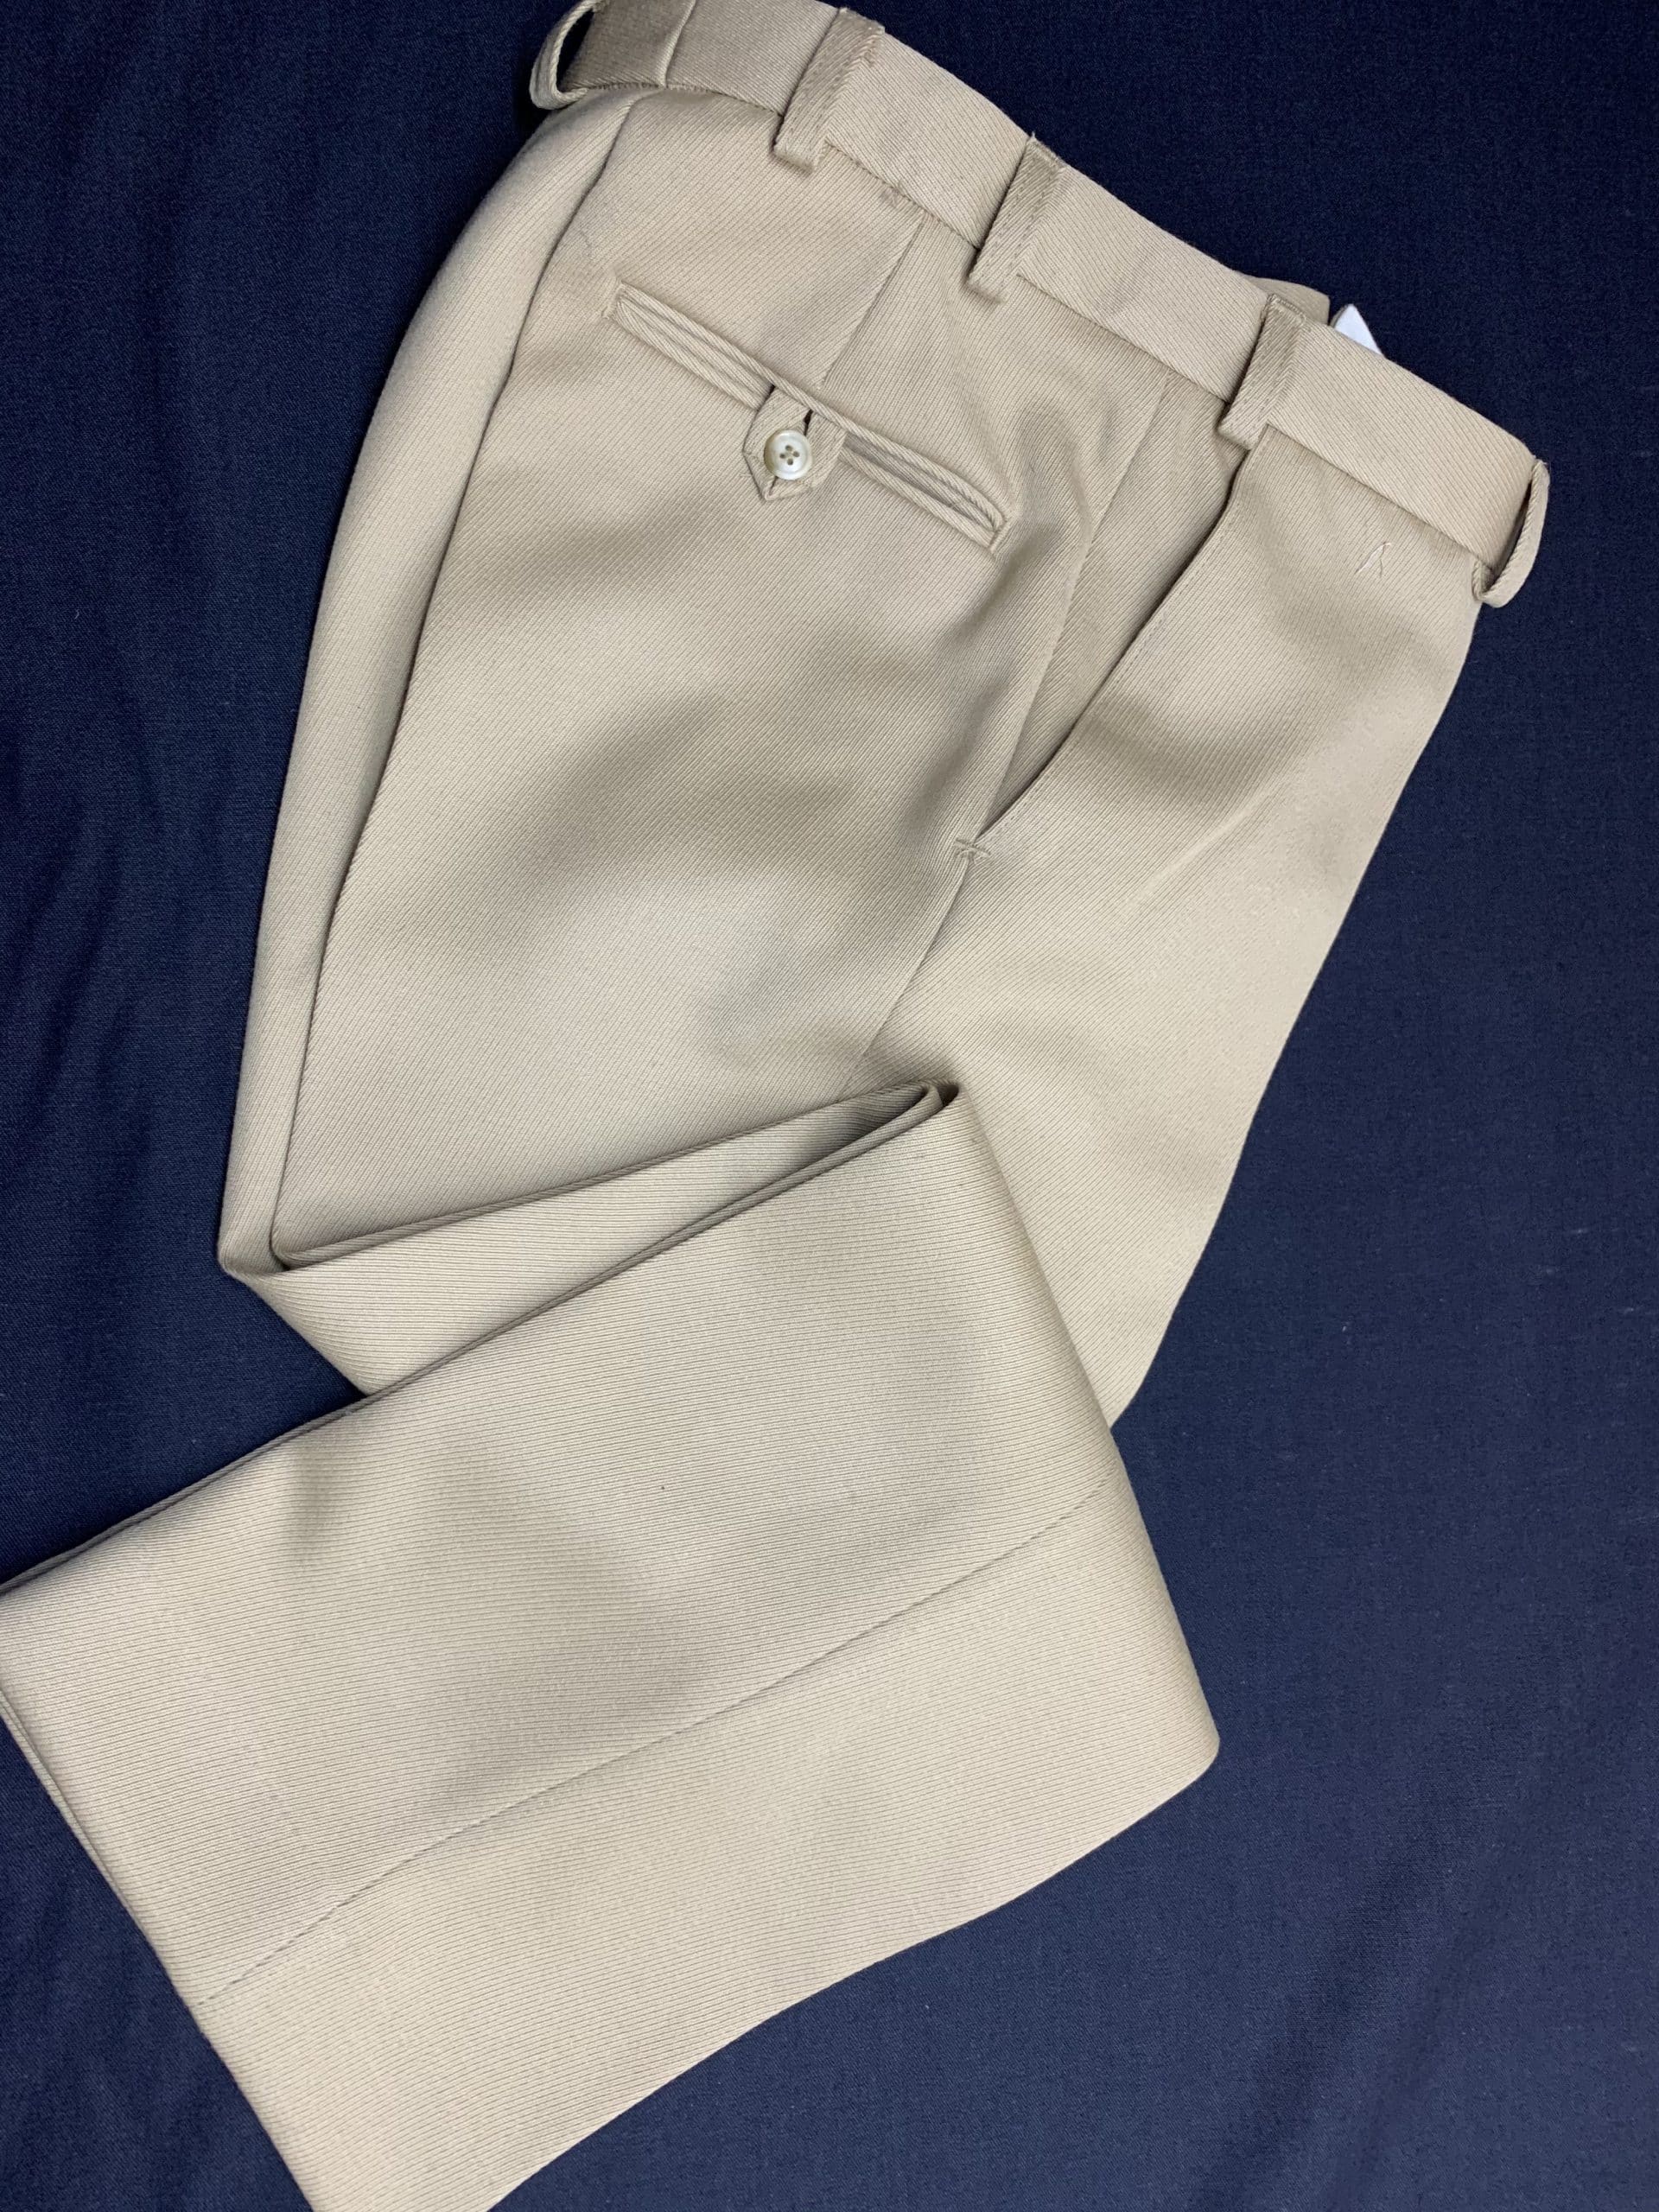 Camel Cavalry Twill Trousers